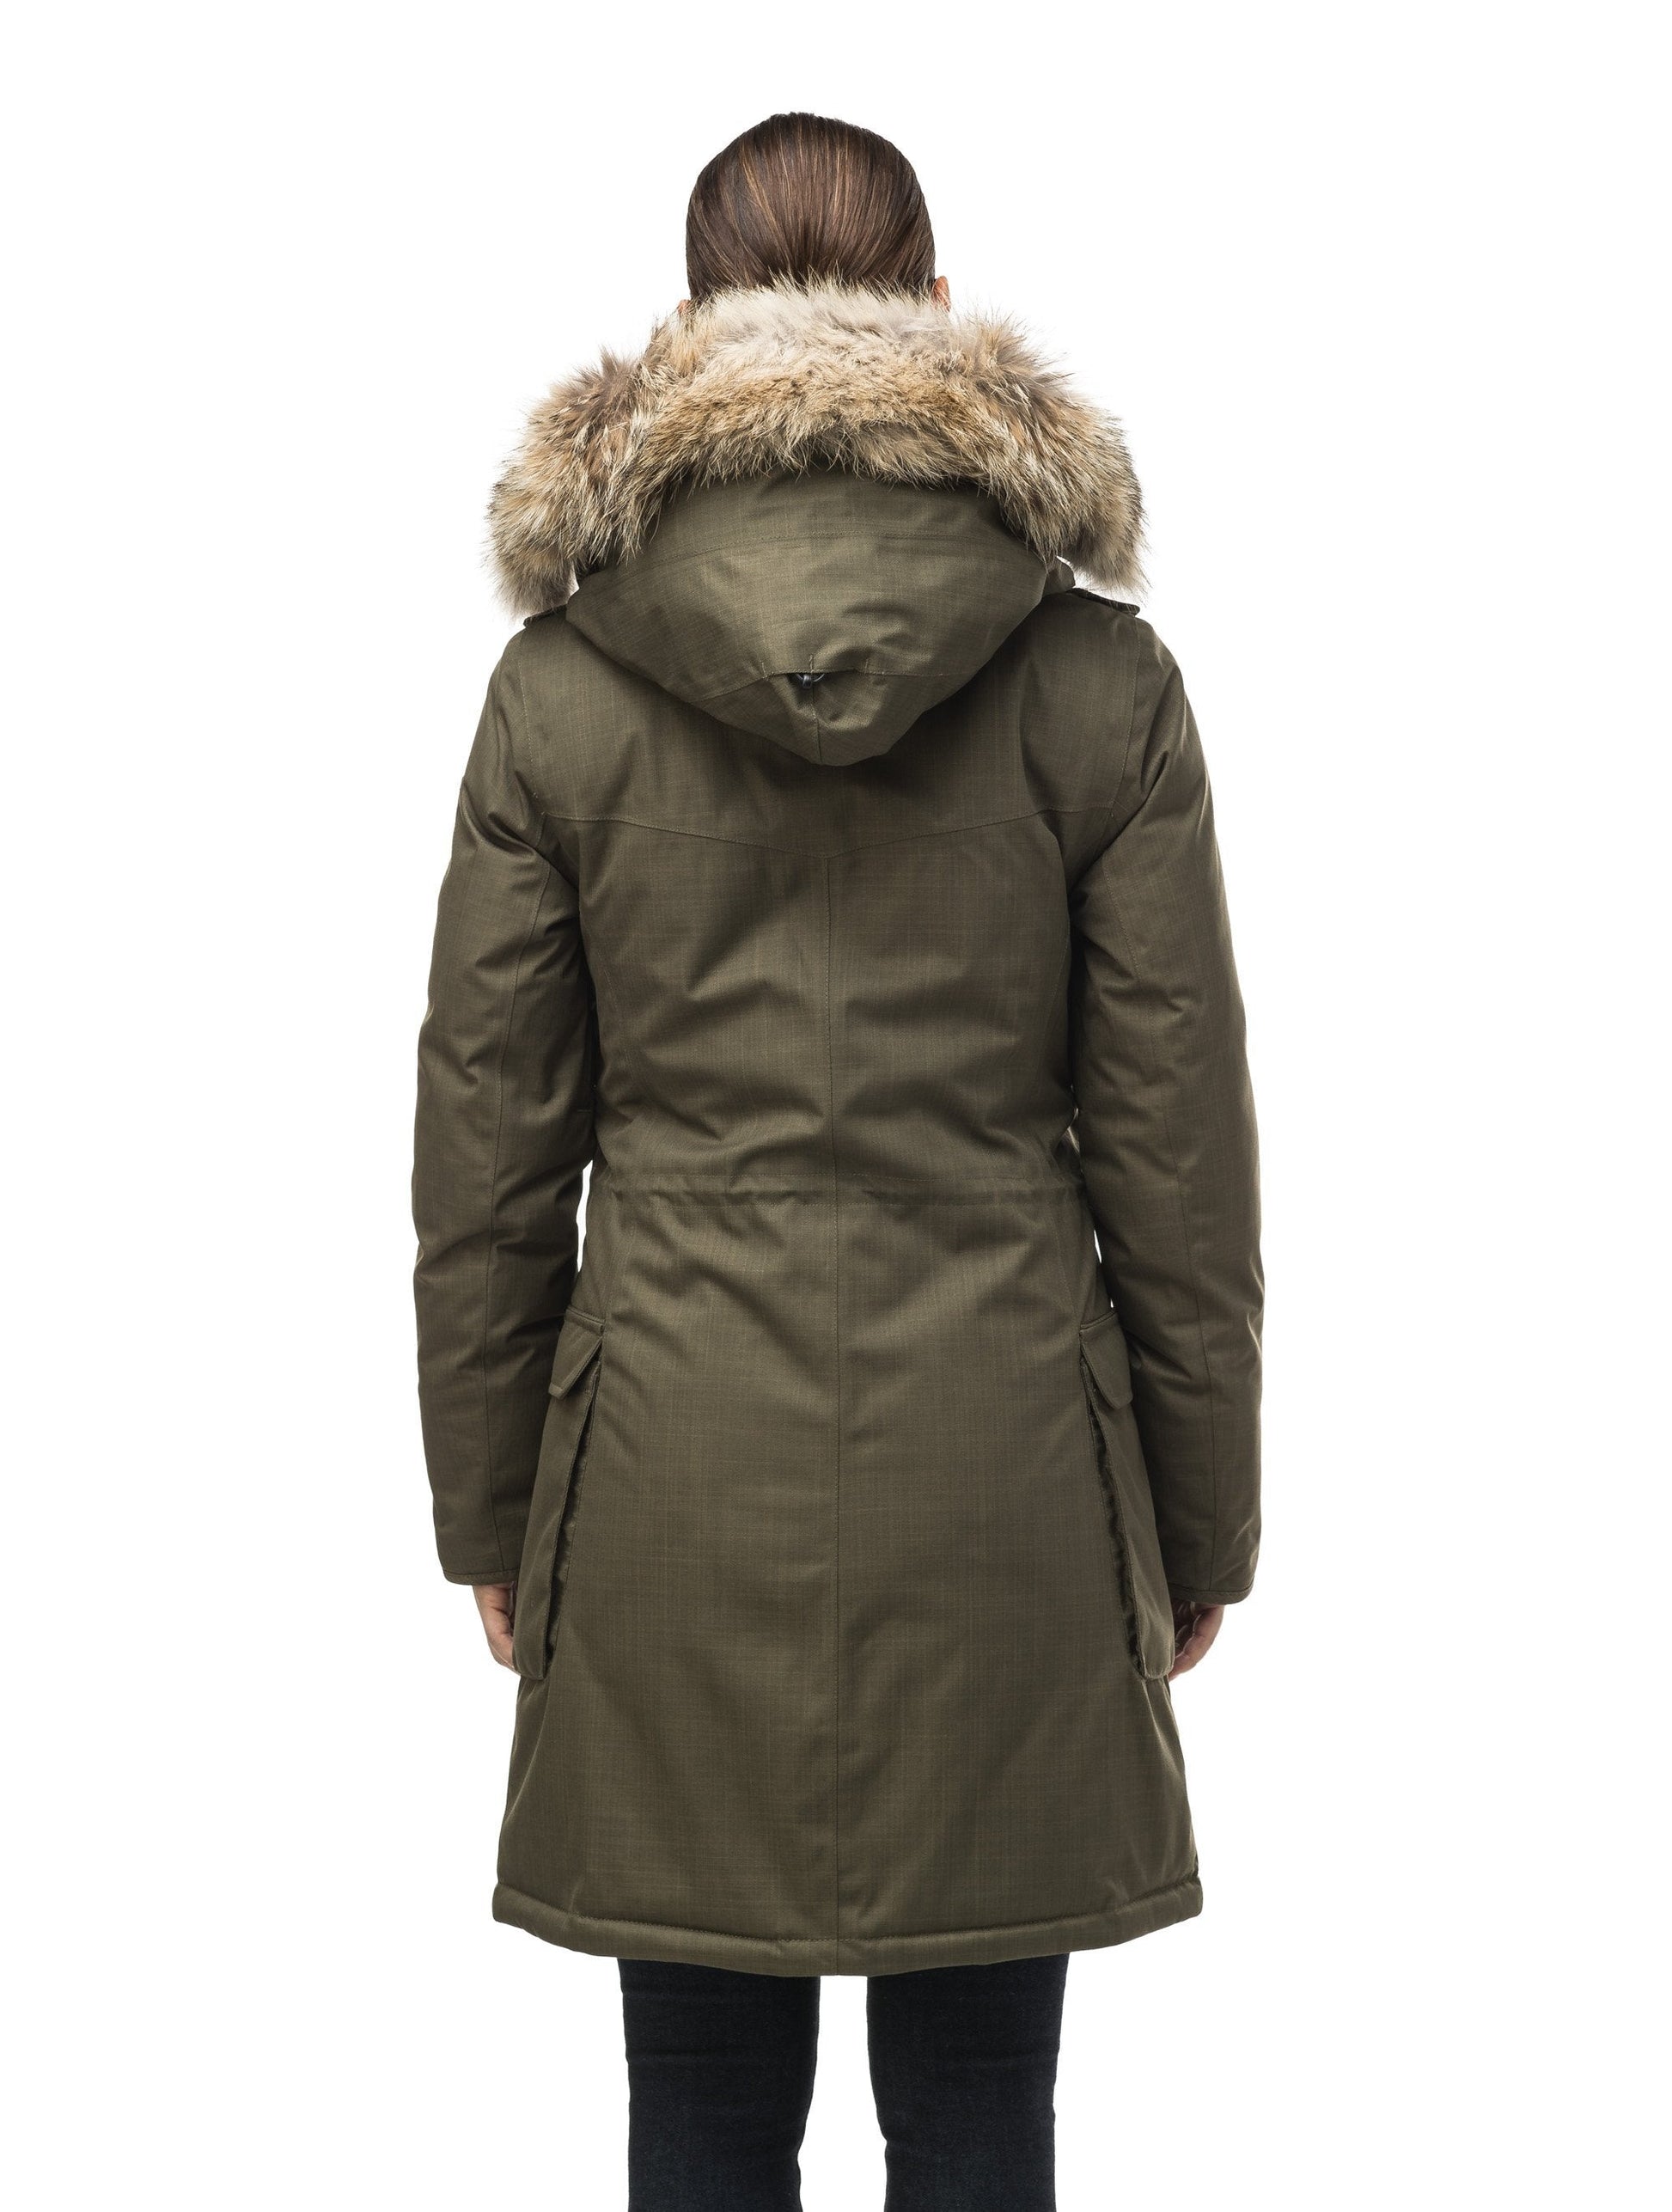 Women's knee length down filled parka with fur trim hood in CH Army Green